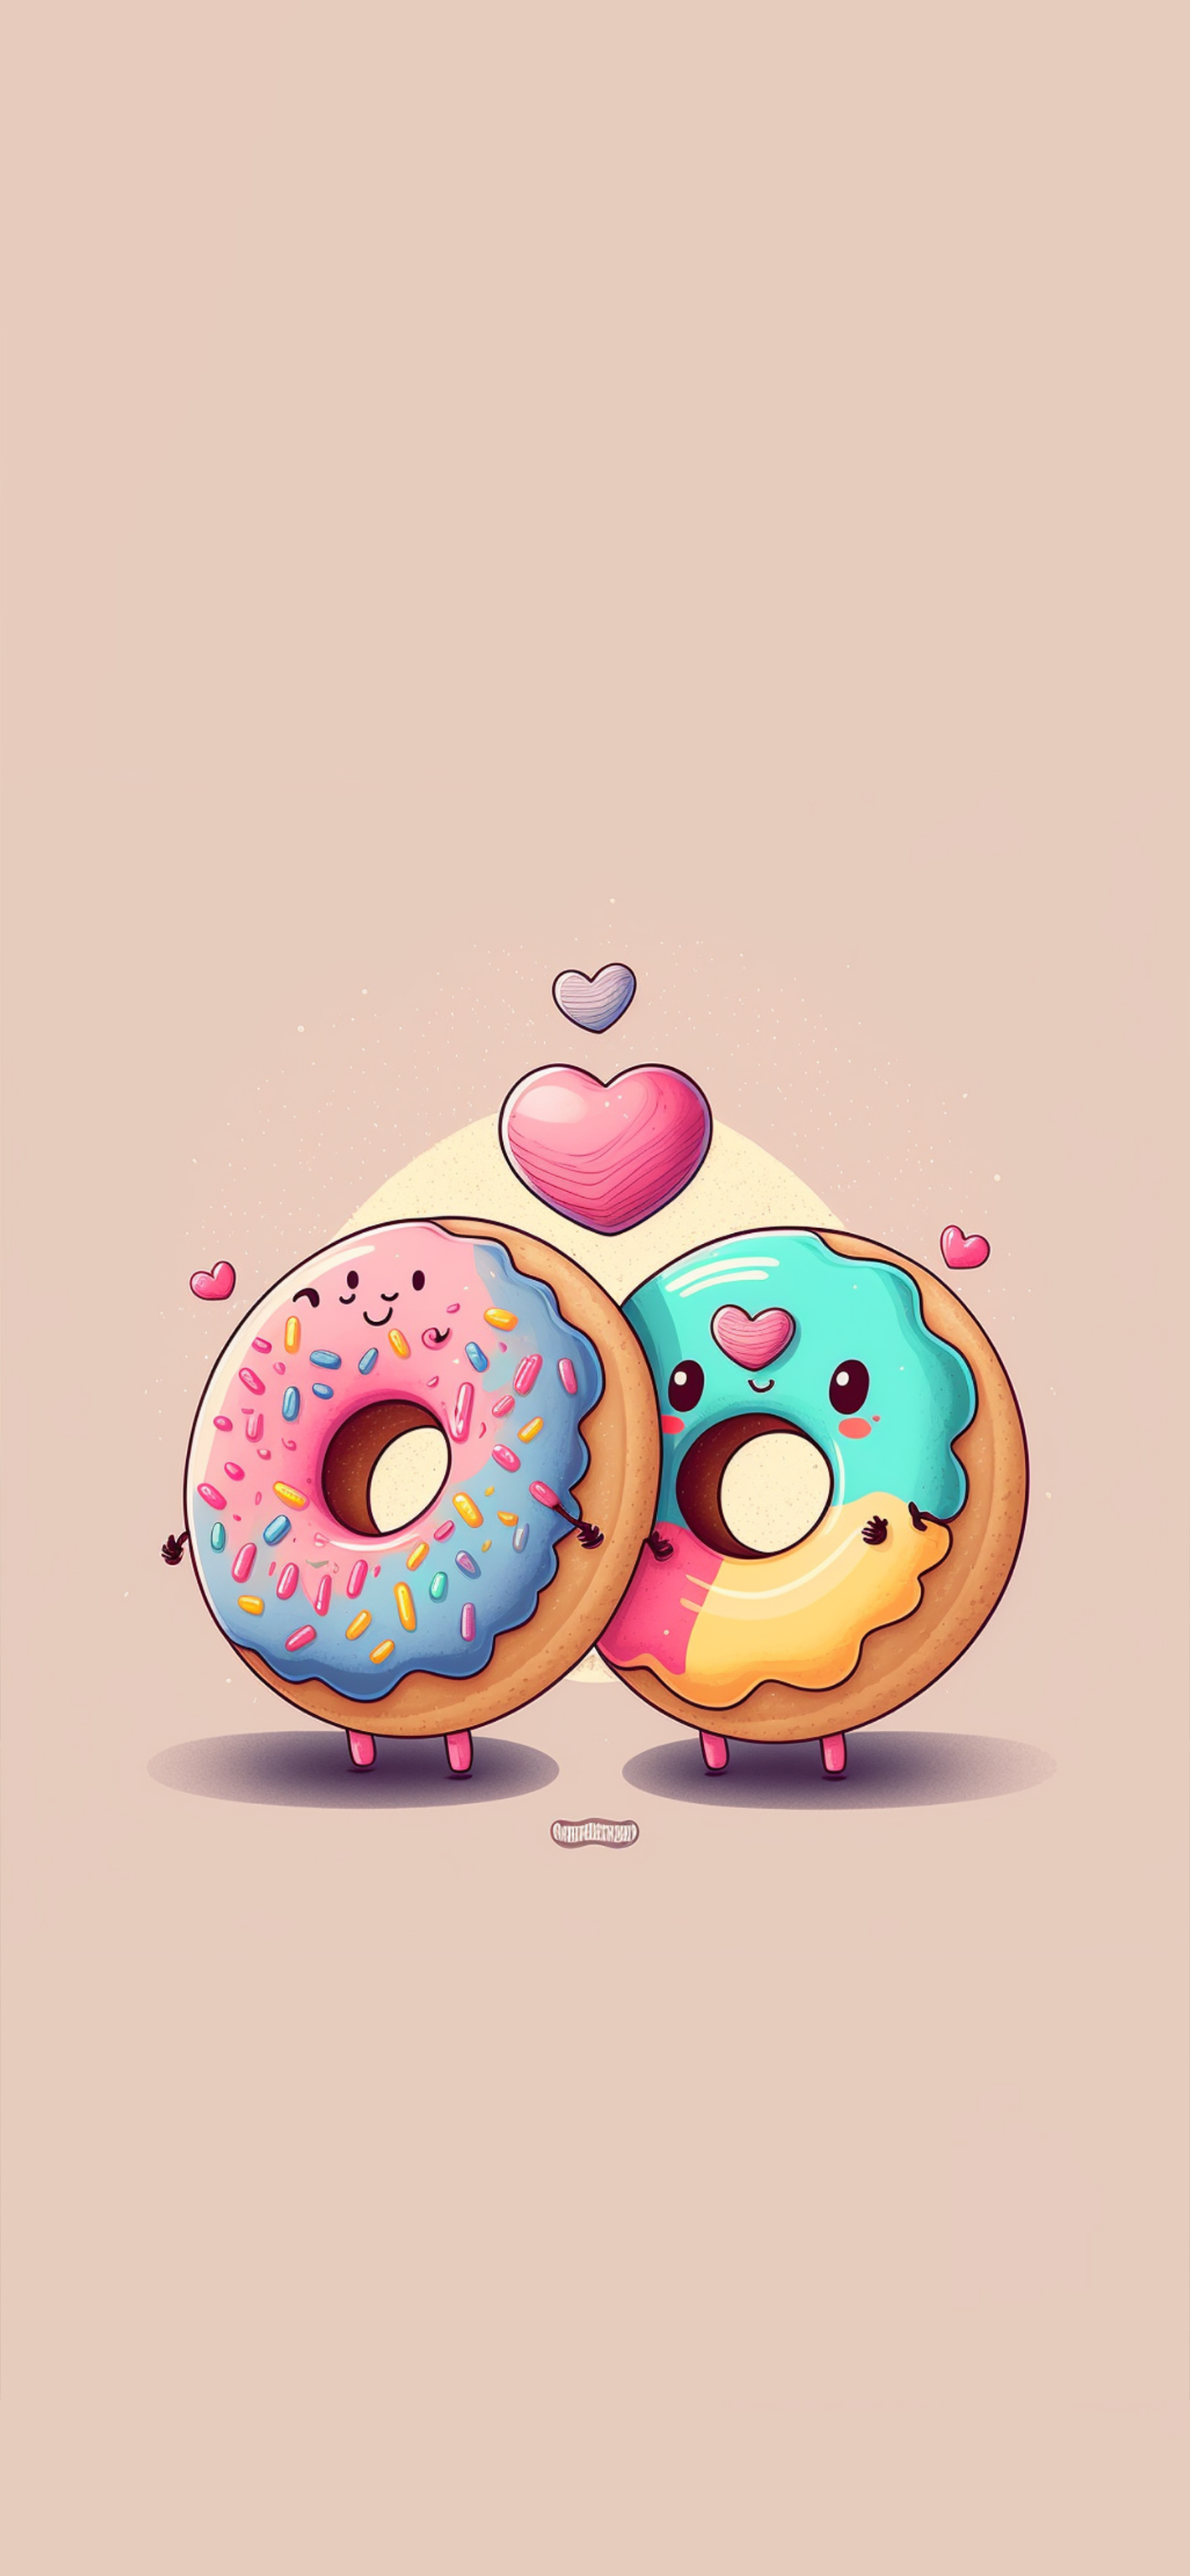 3D Donut Phone Wallpaper IOS & ANDROID - Etsy